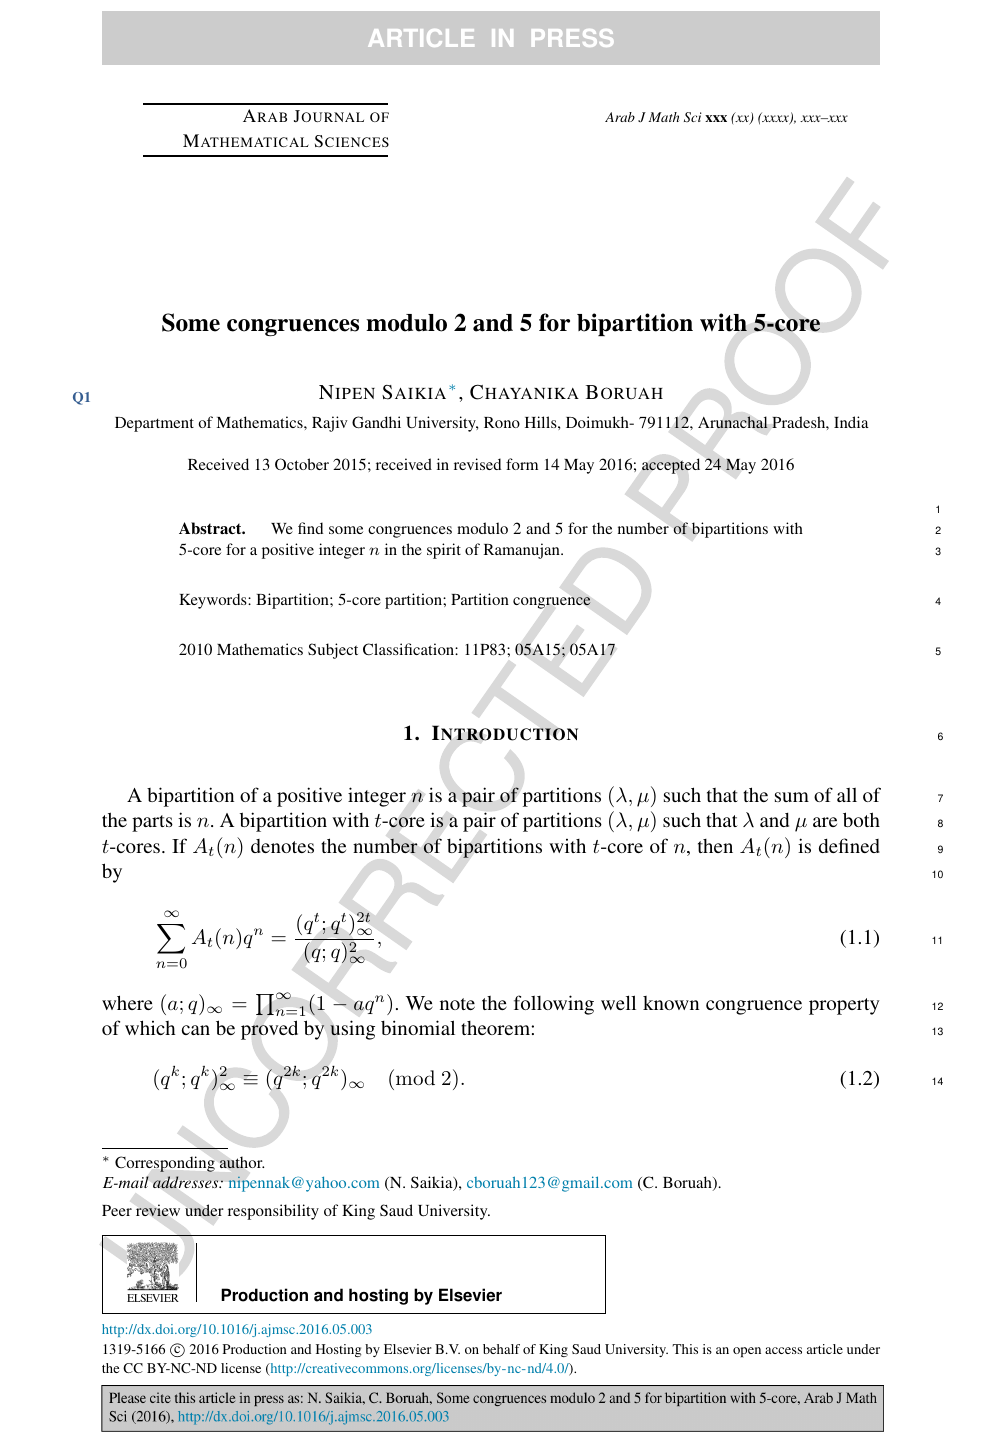 Some Congruences Modulo 2 And 5 For Bipartition With 5 Core Topic Of Research Paper In Physical Sciences Download Scholarly Article Pdf And Read For Free On Cyberleninka Open Science Hub